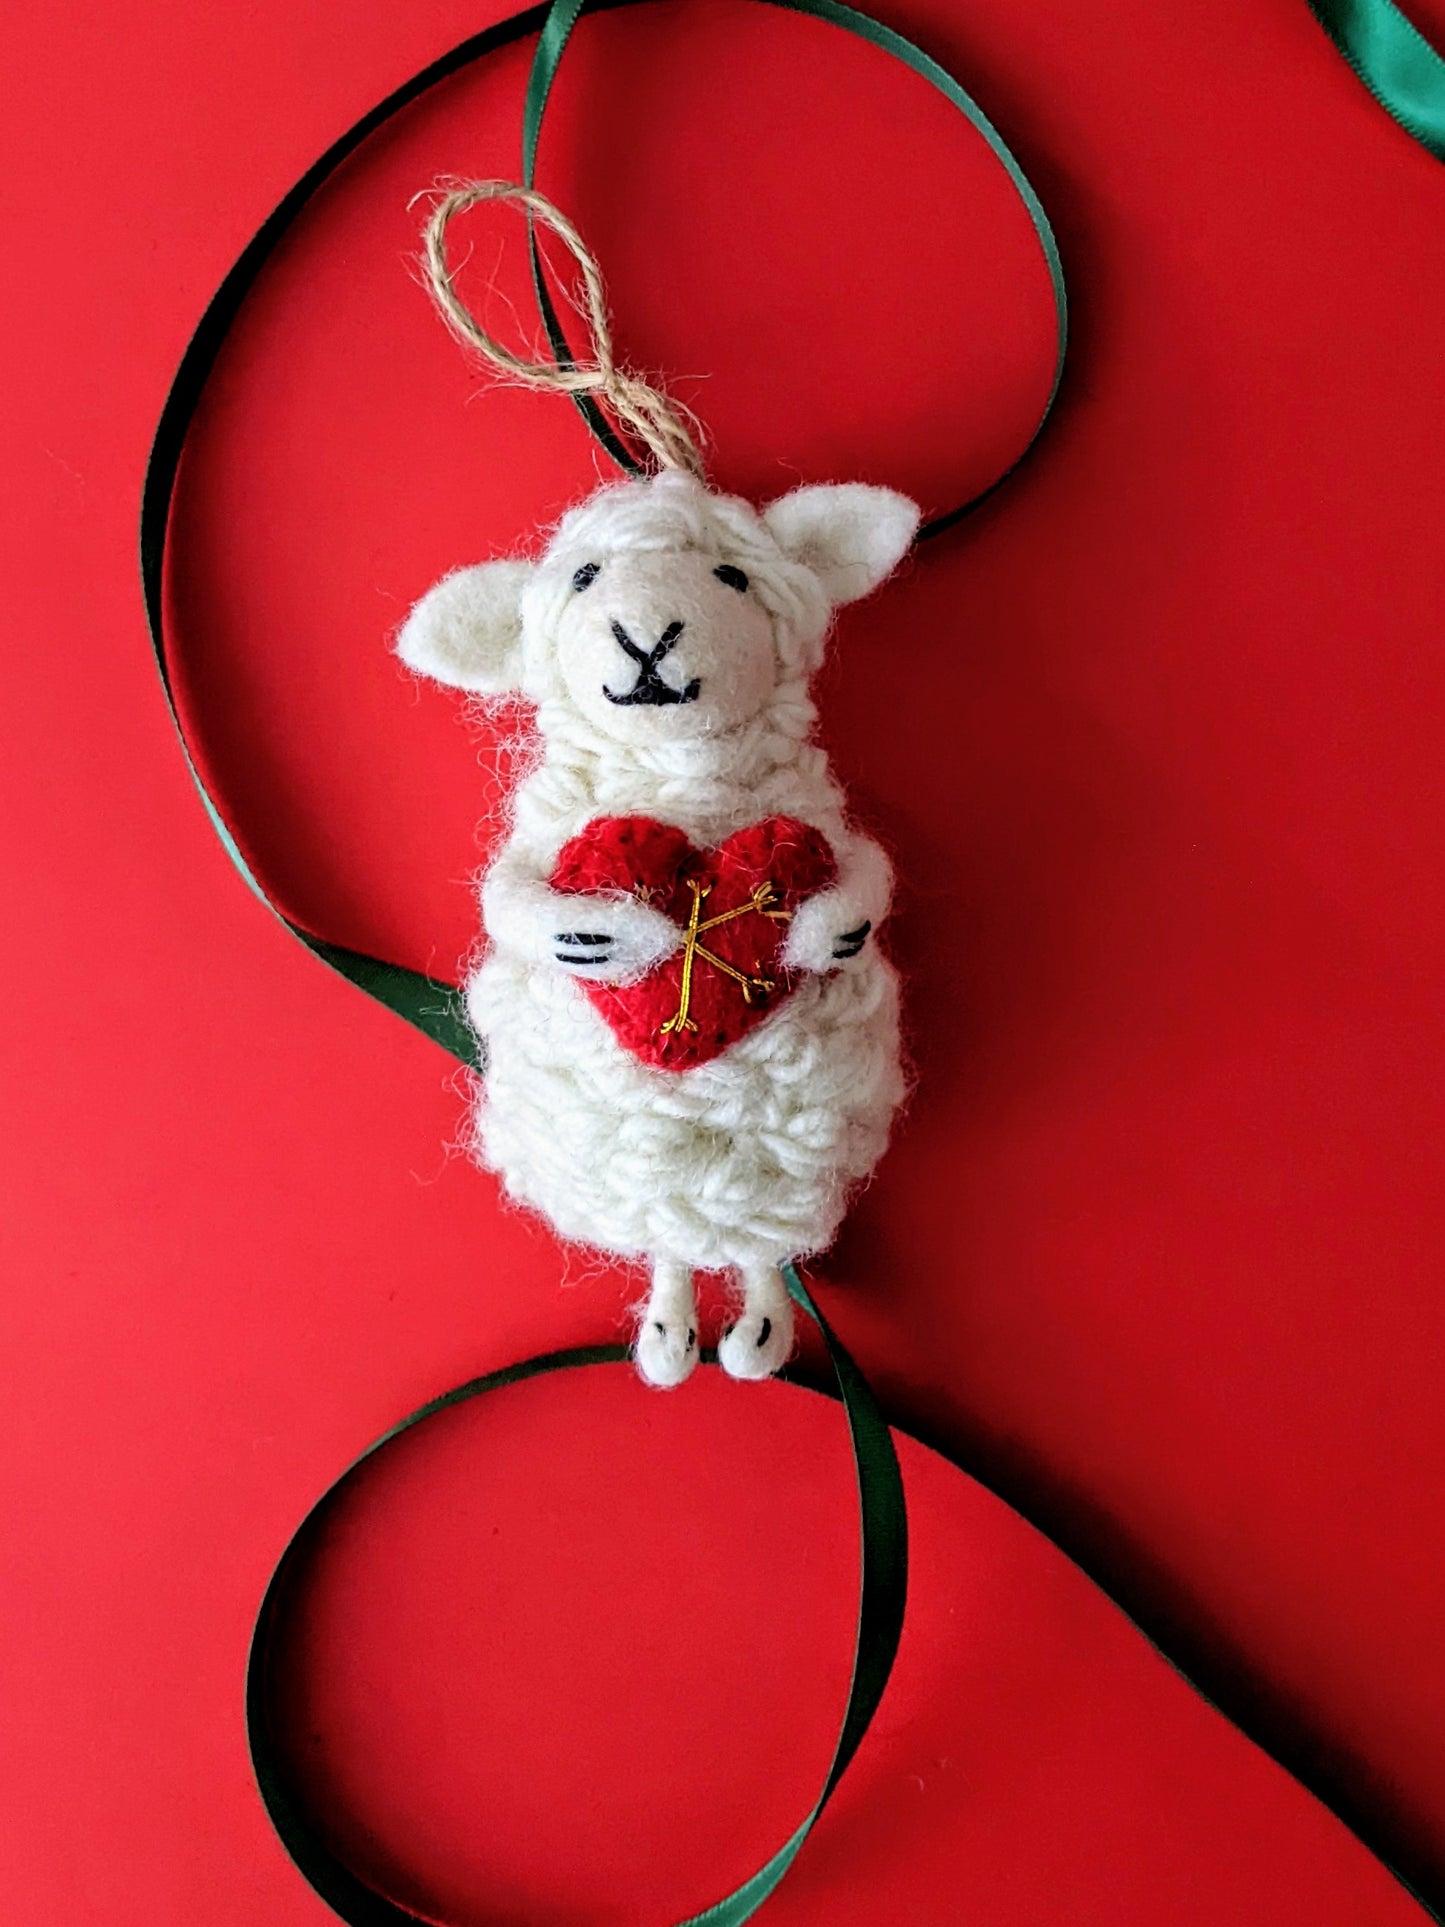 Heart on my Sheep Ornament